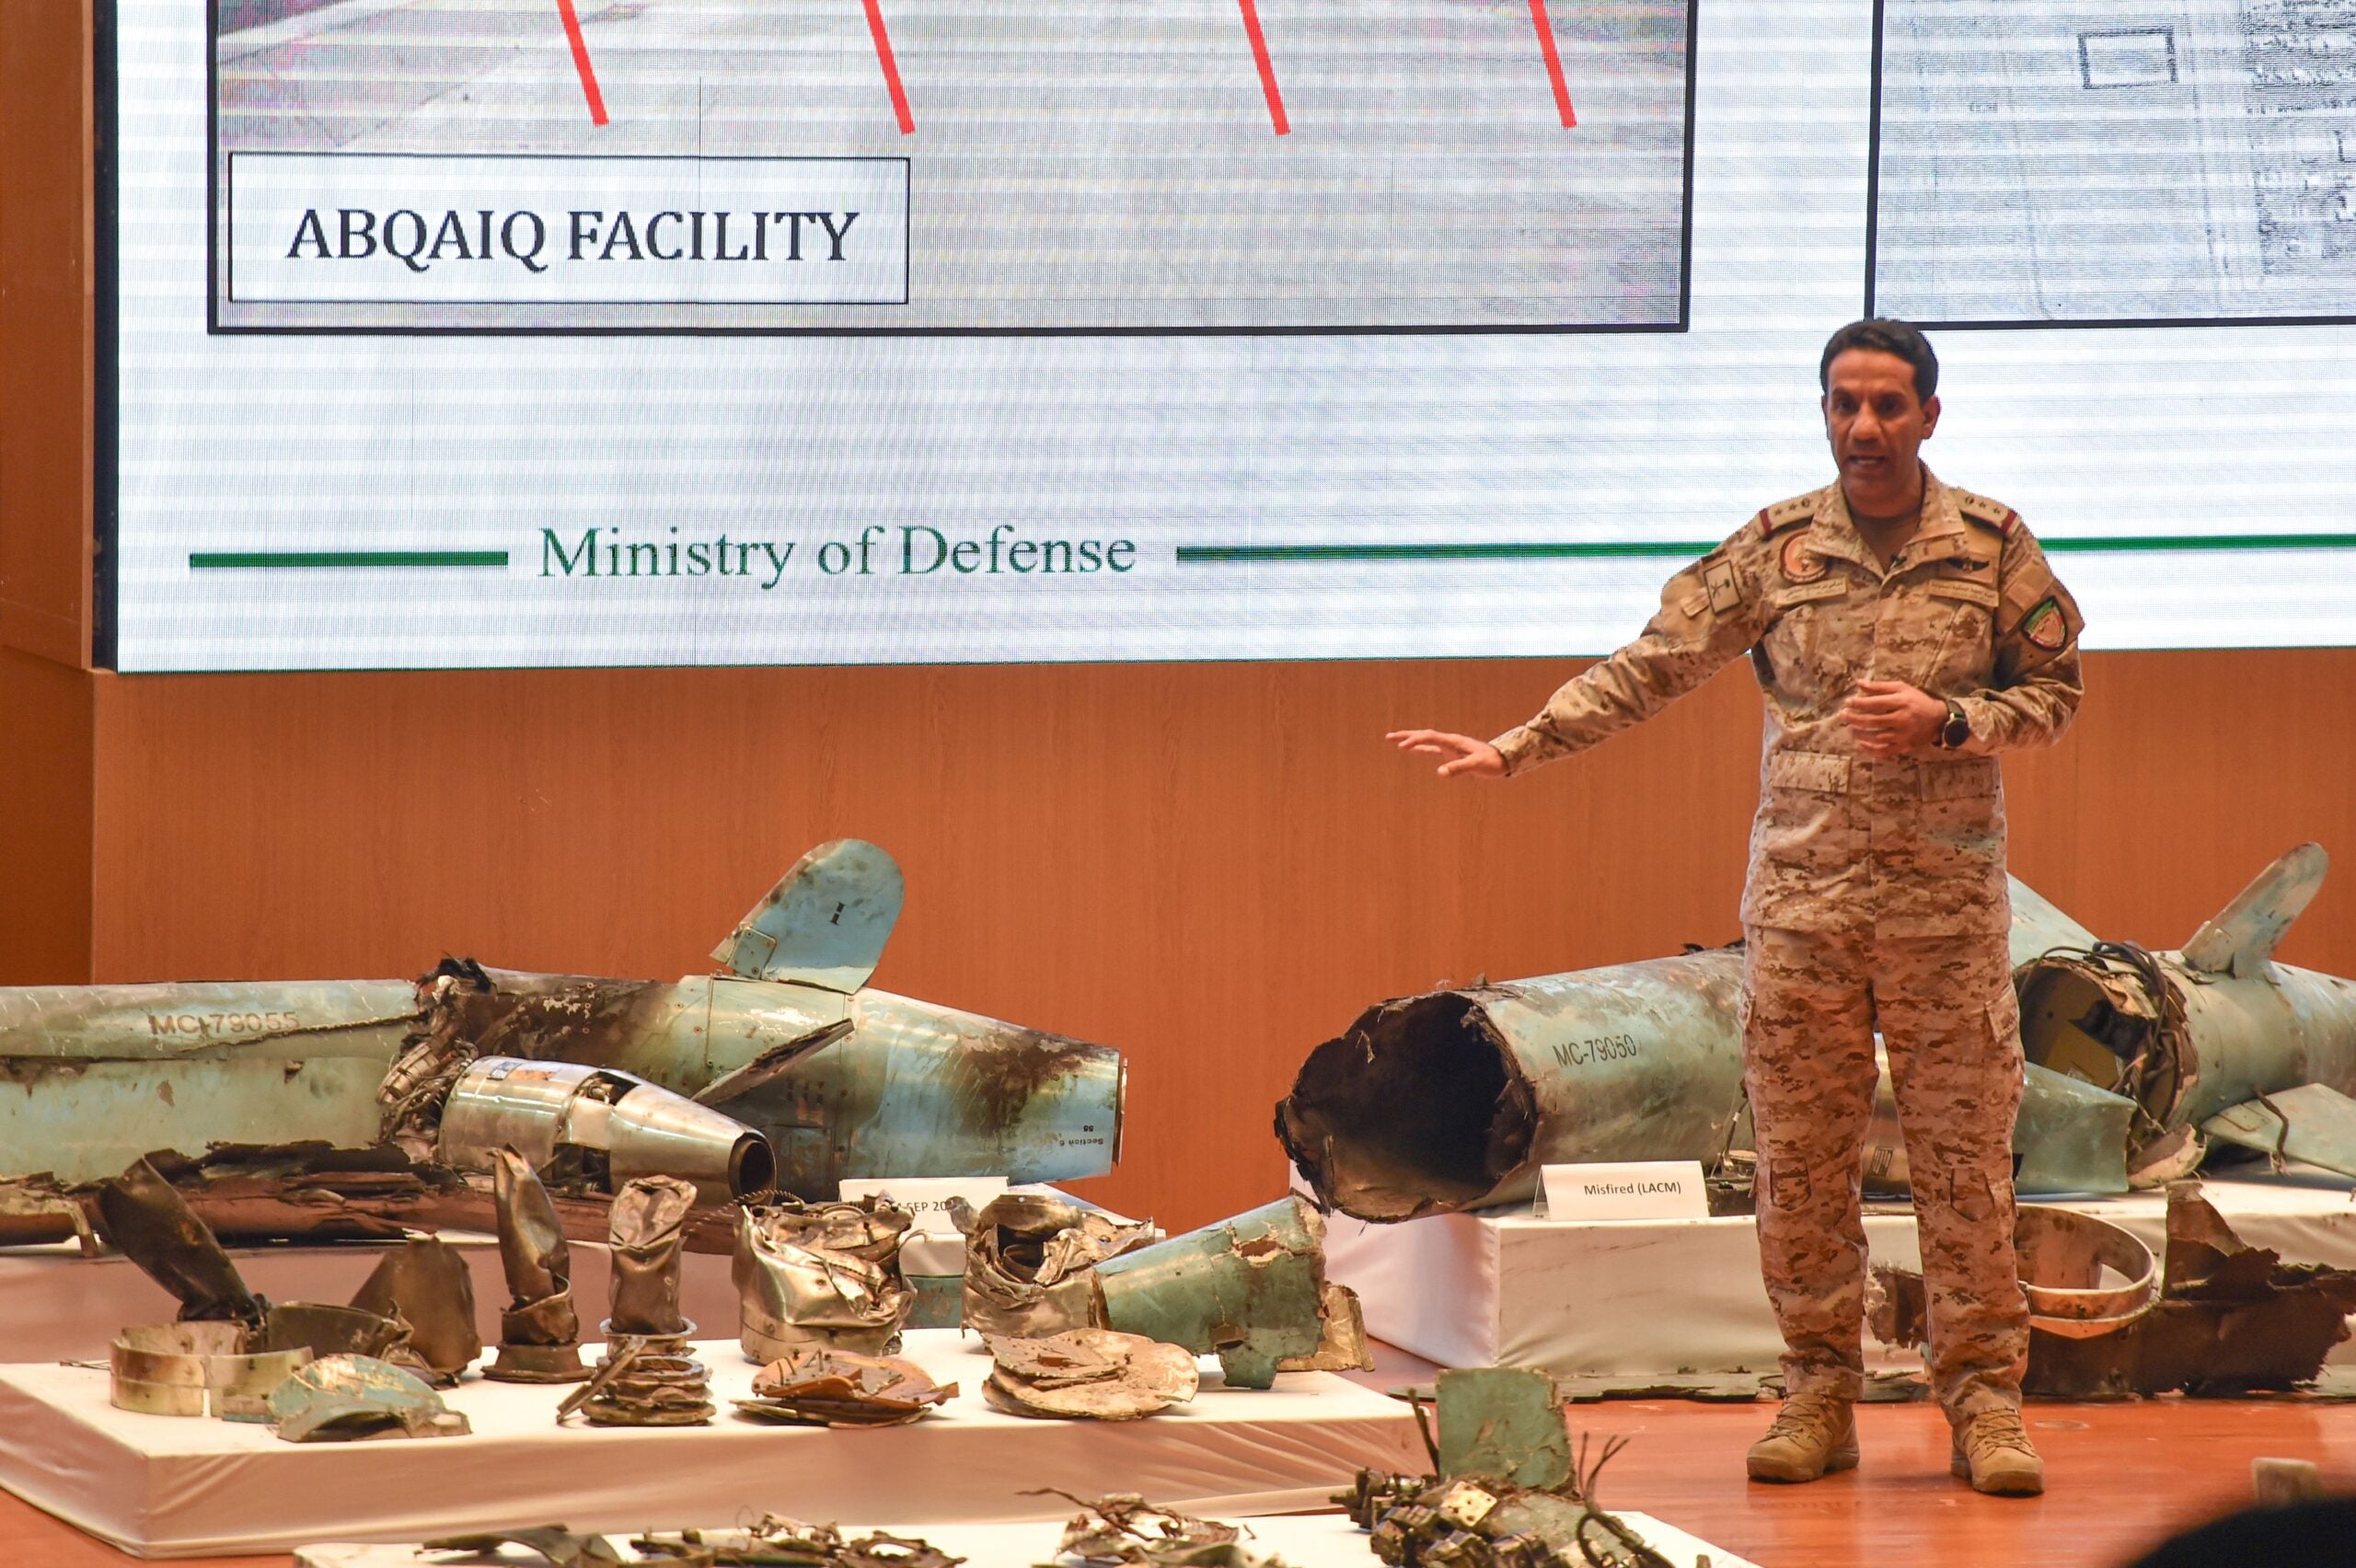 TOPSHOT - Saudi defence ministry spokesman Colonel Turki bin Saleh al-Malki displays pieces of what he said were Iranian cruise missiles and drones recovered from the attack site that targeted Saudi Aramco's facilities, during a press conference in Riyadh on September 18, 2019. - Saudi Arabia said that strikes on its oil infrastructure came from the "north" and were sponsored by Iran, but that the kingdom was still investigating the exact launch site. (Photo by Fayez Nureldine / AFP) (Photo by FAYEZ NURELDINE/AFP via Getty Images)